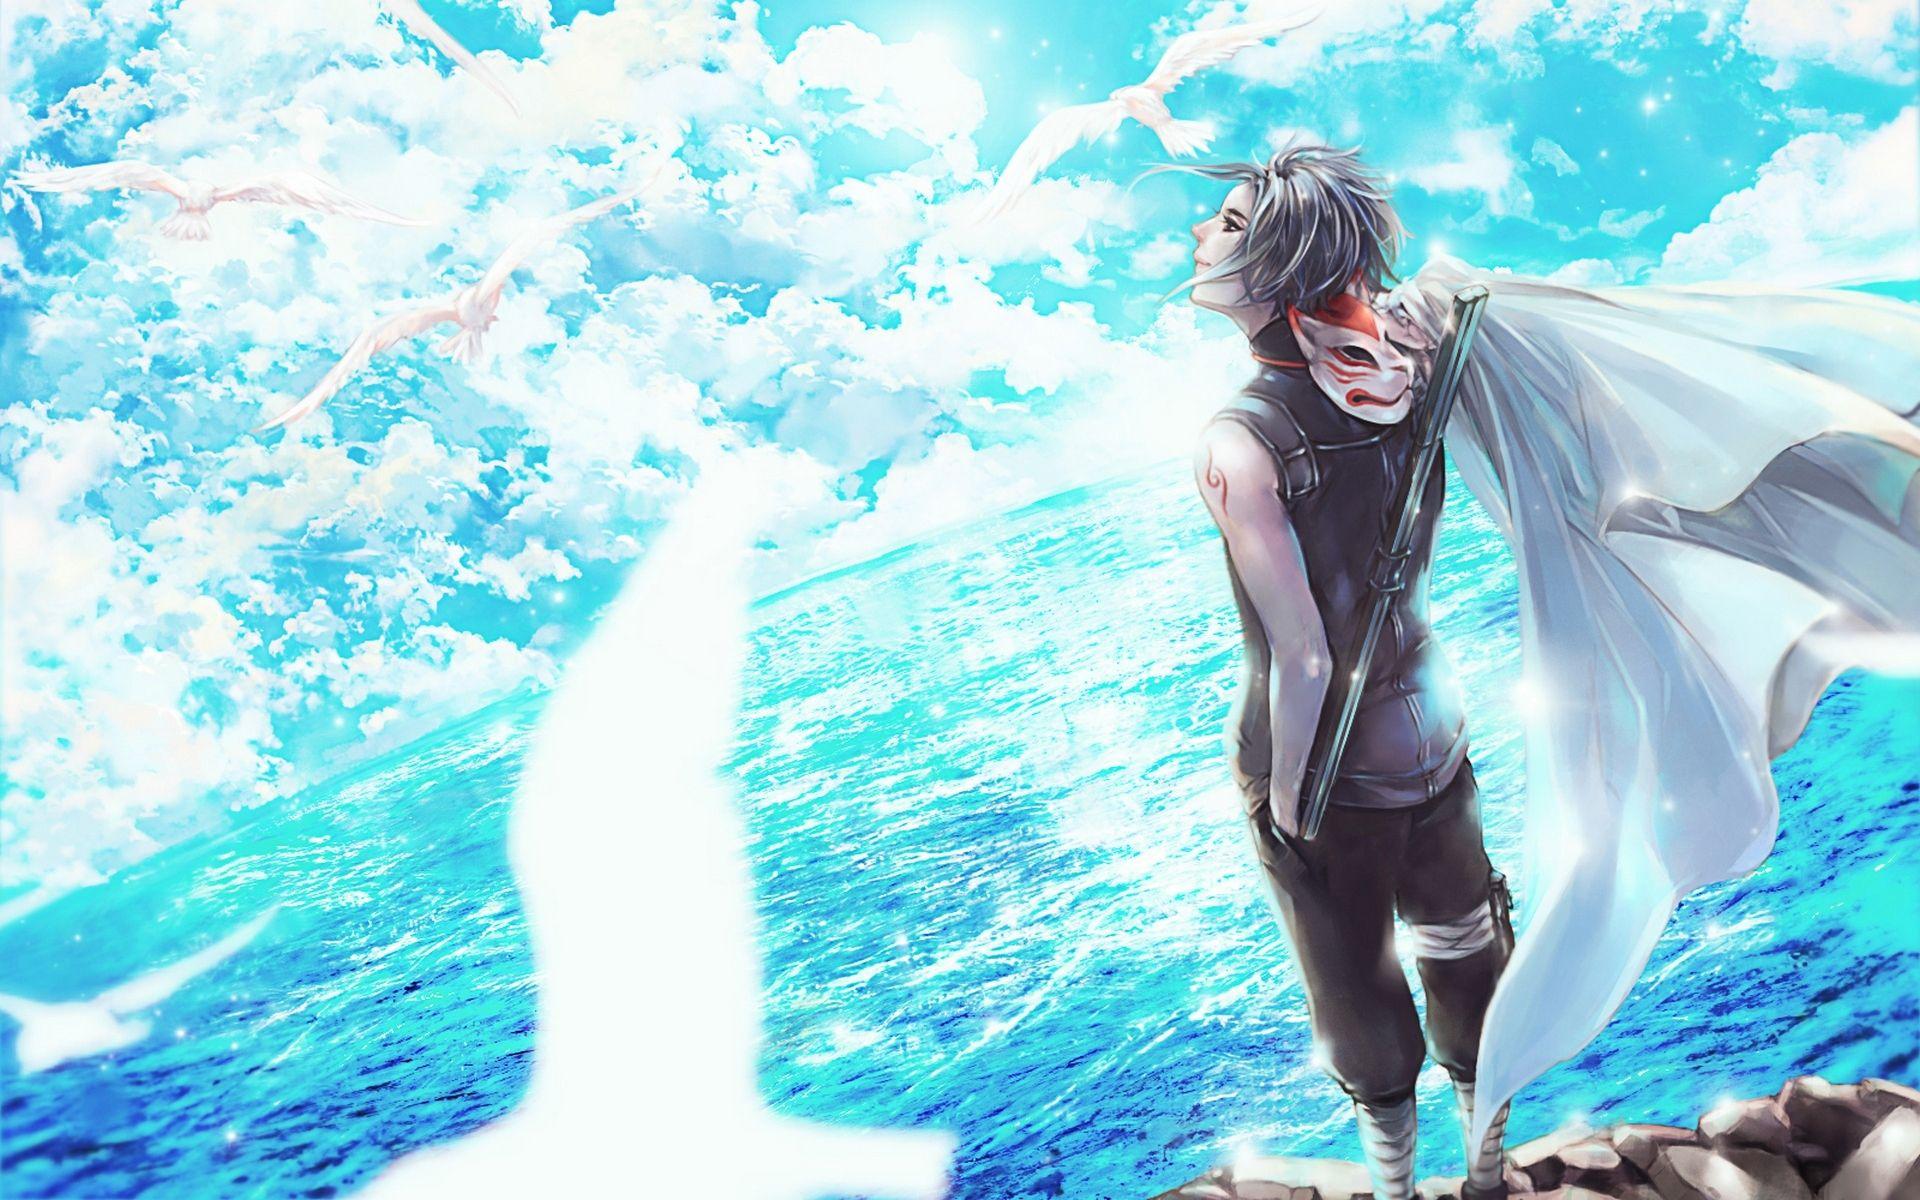 Download wallpaper the sky, clouds, birds, smile, the ocean, anime